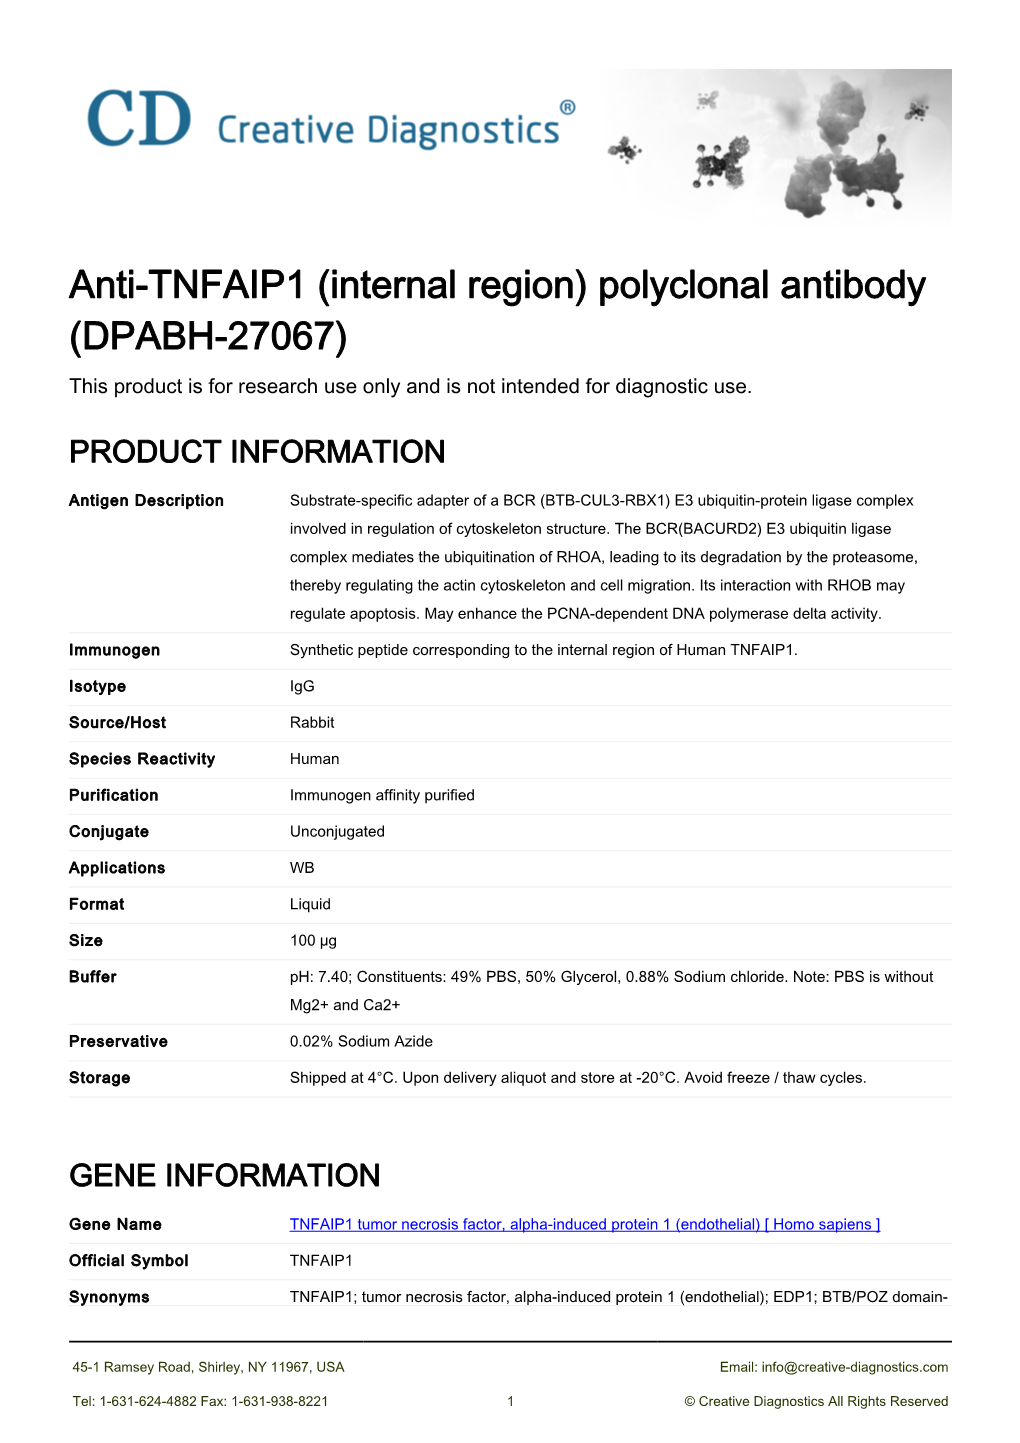 Anti-TNFAIP1 (Internal Region) Polyclonal Antibody (DPABH-27067) This Product Is for Research Use Only and Is Not Intended for Diagnostic Use